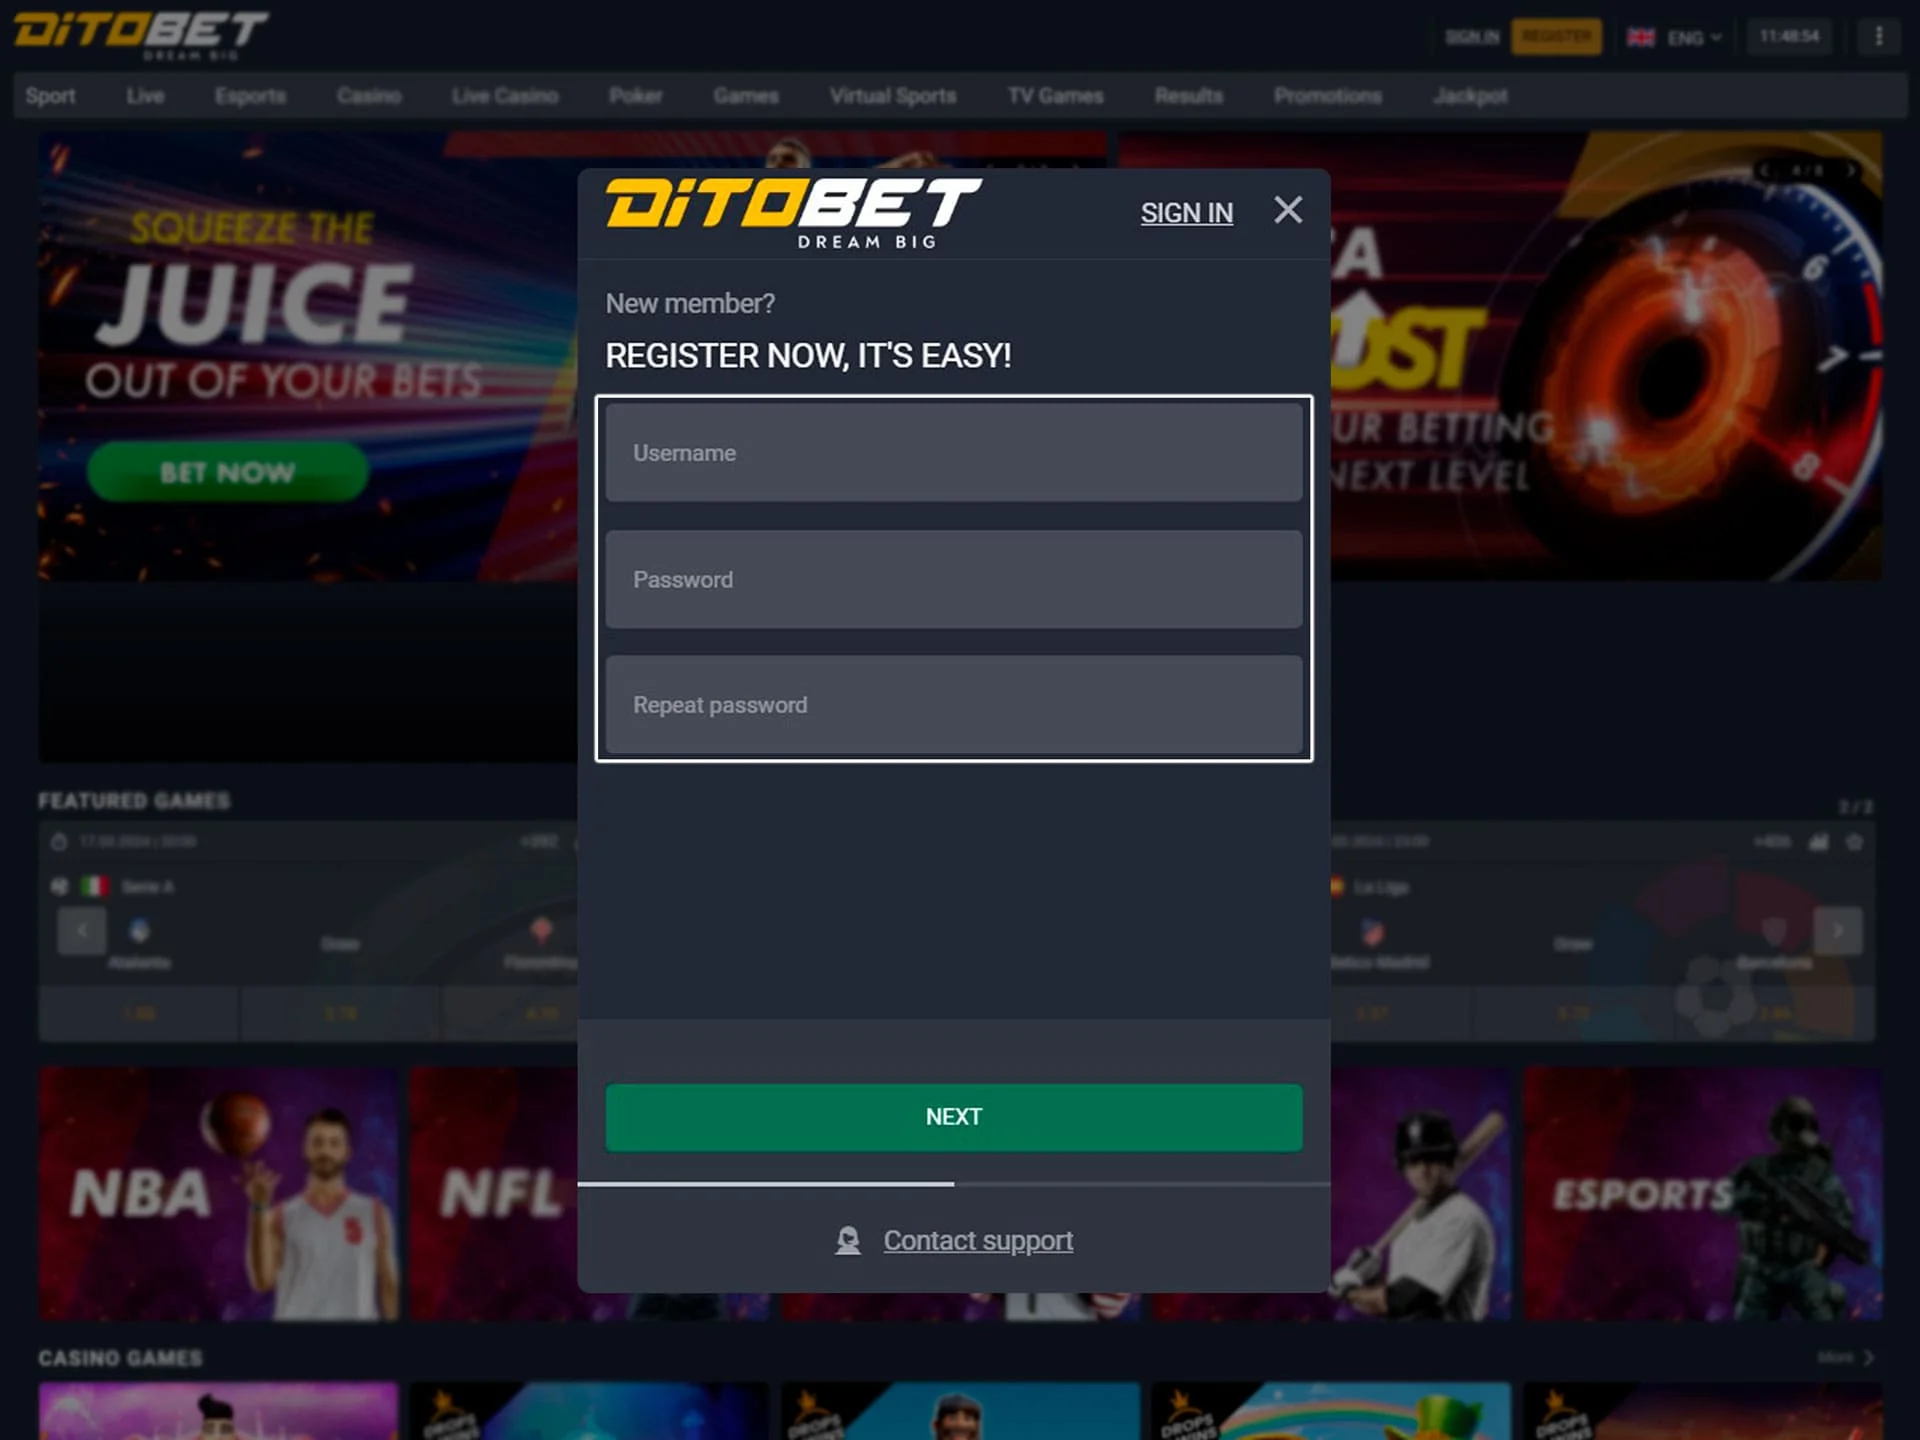 To create an account at Ditobet, fill in the form fields with genuine information.